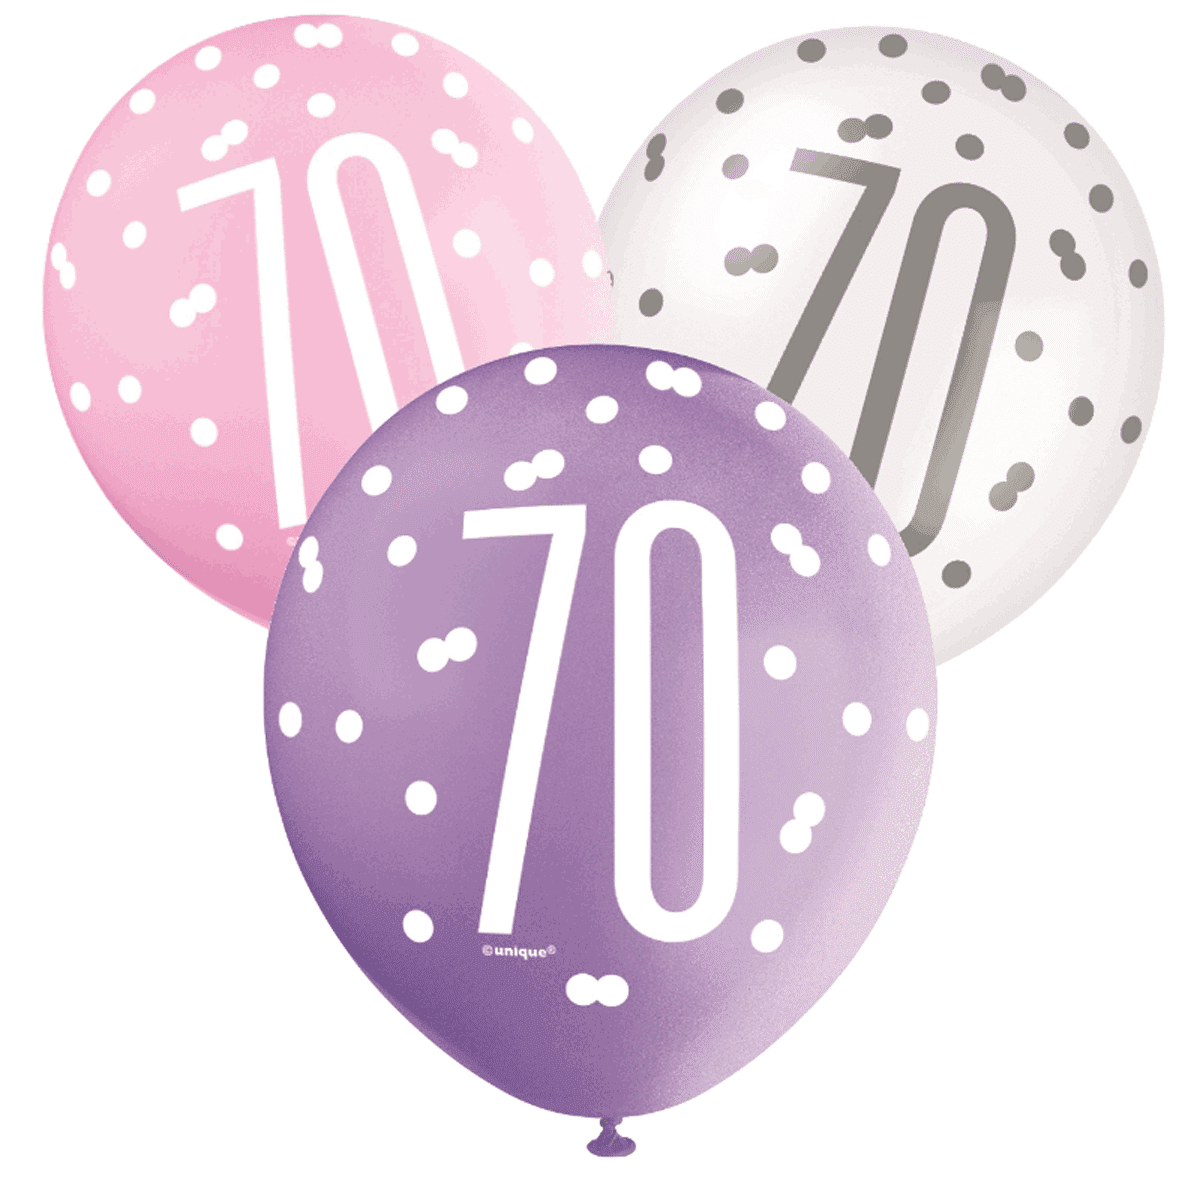 Pink, Lavender & White Latex Balloons 70th